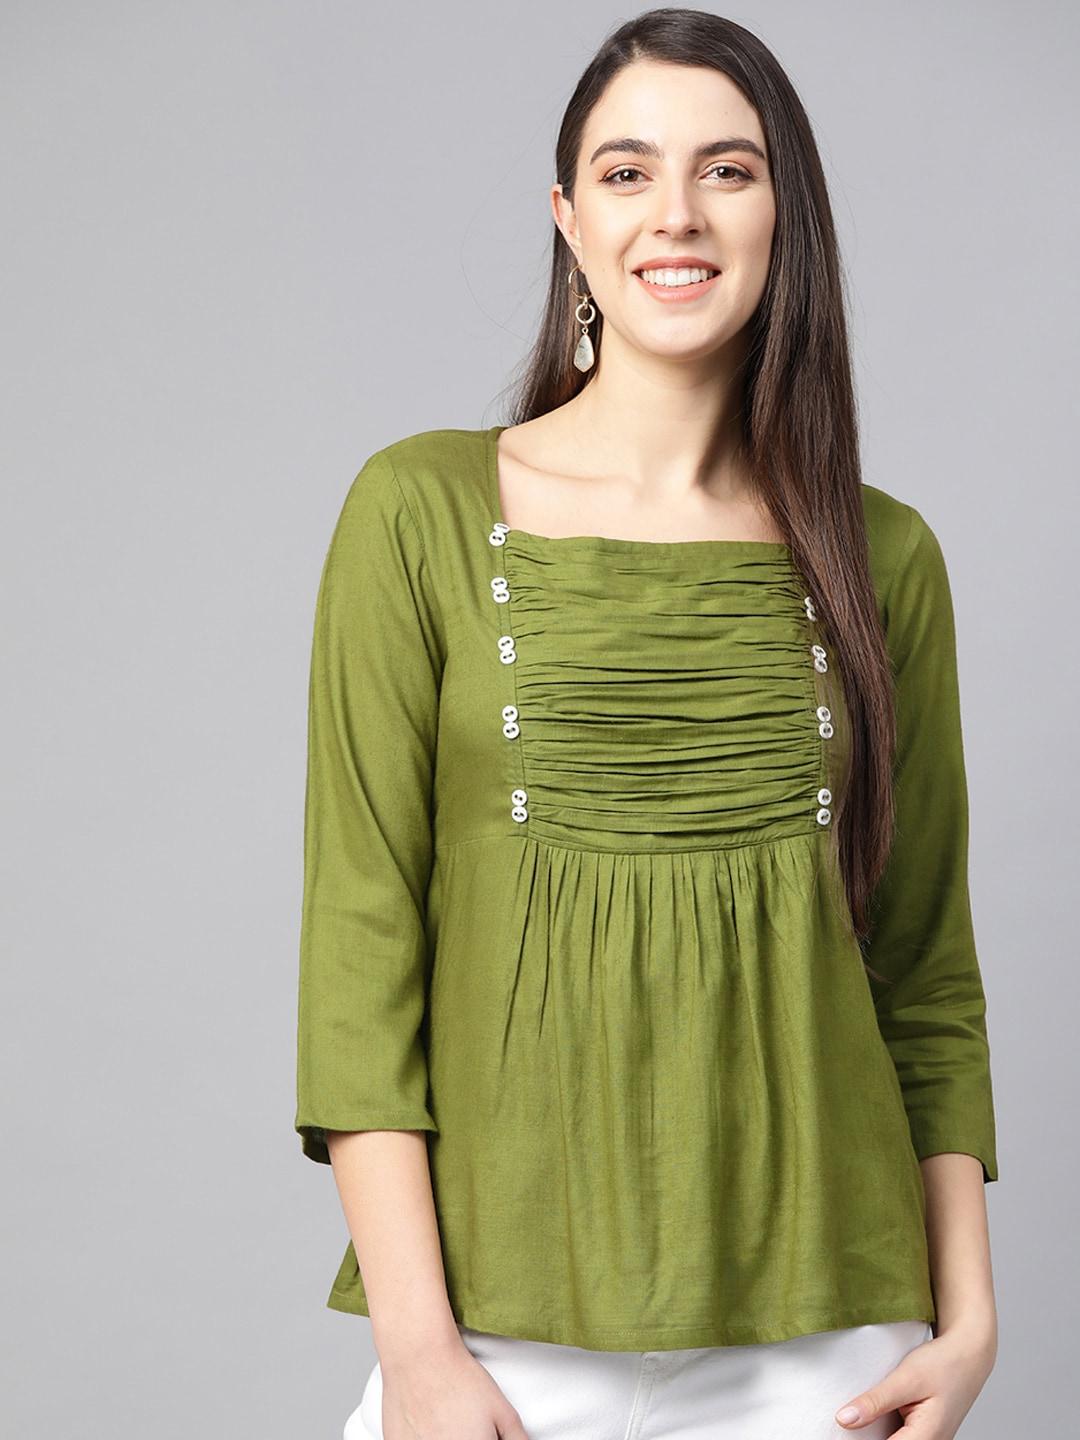 yash-gallery-women-olive-green-pleated-a-line-top